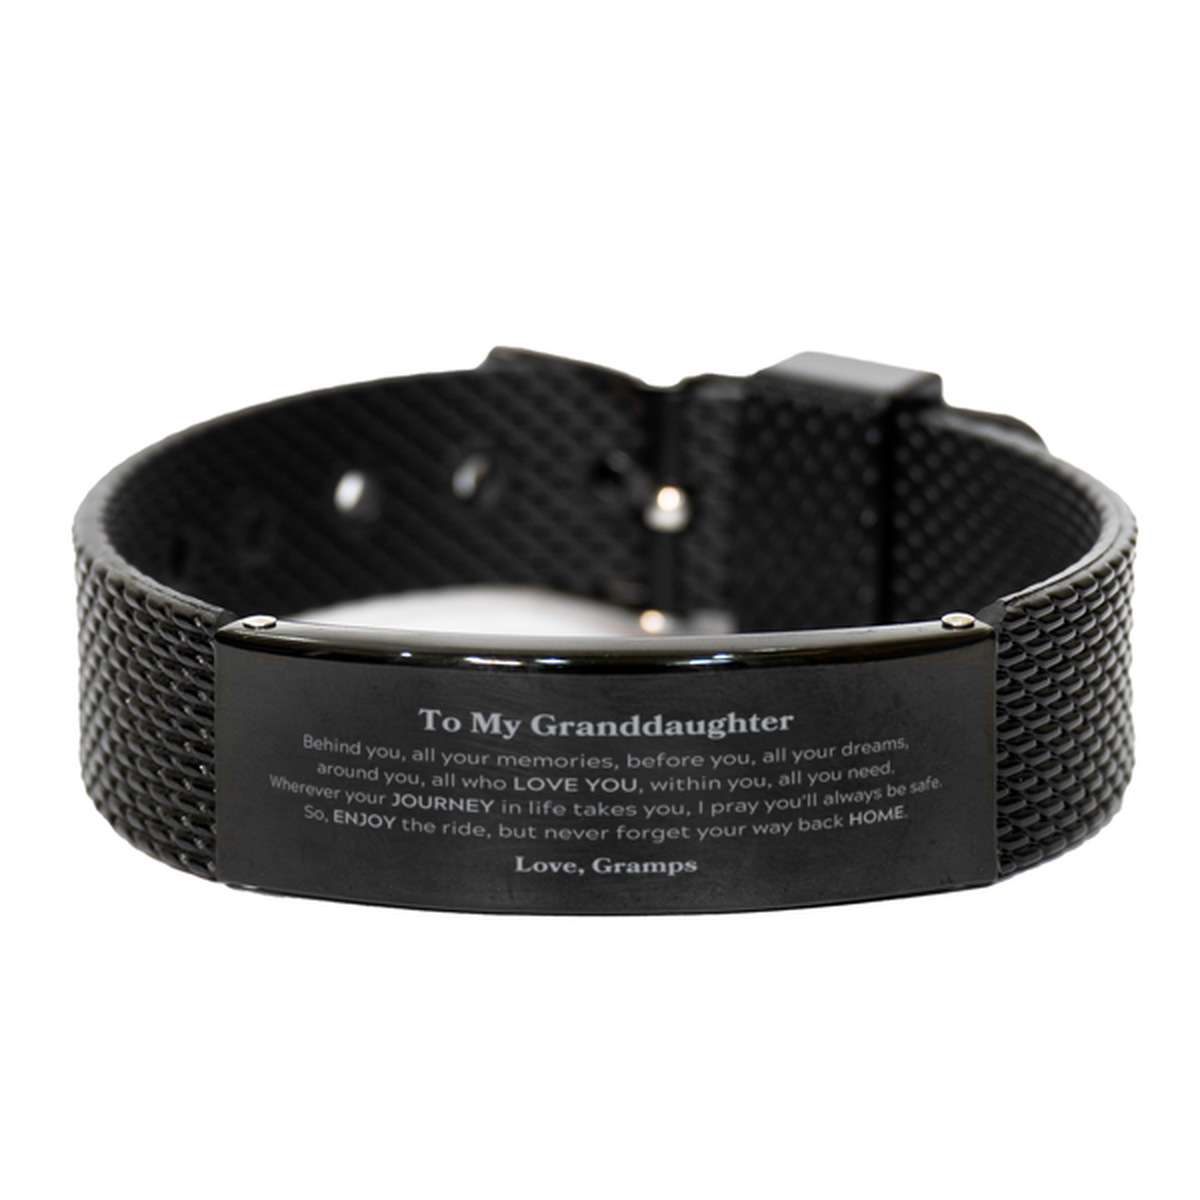 To My Granddaughter Graduation Gifts from Gramps, Granddaughter Black Shark Mesh Bracelet Christmas Birthday Gifts for Granddaughter Behind you, all your memories, before you, all your dreams. Love, Gramps